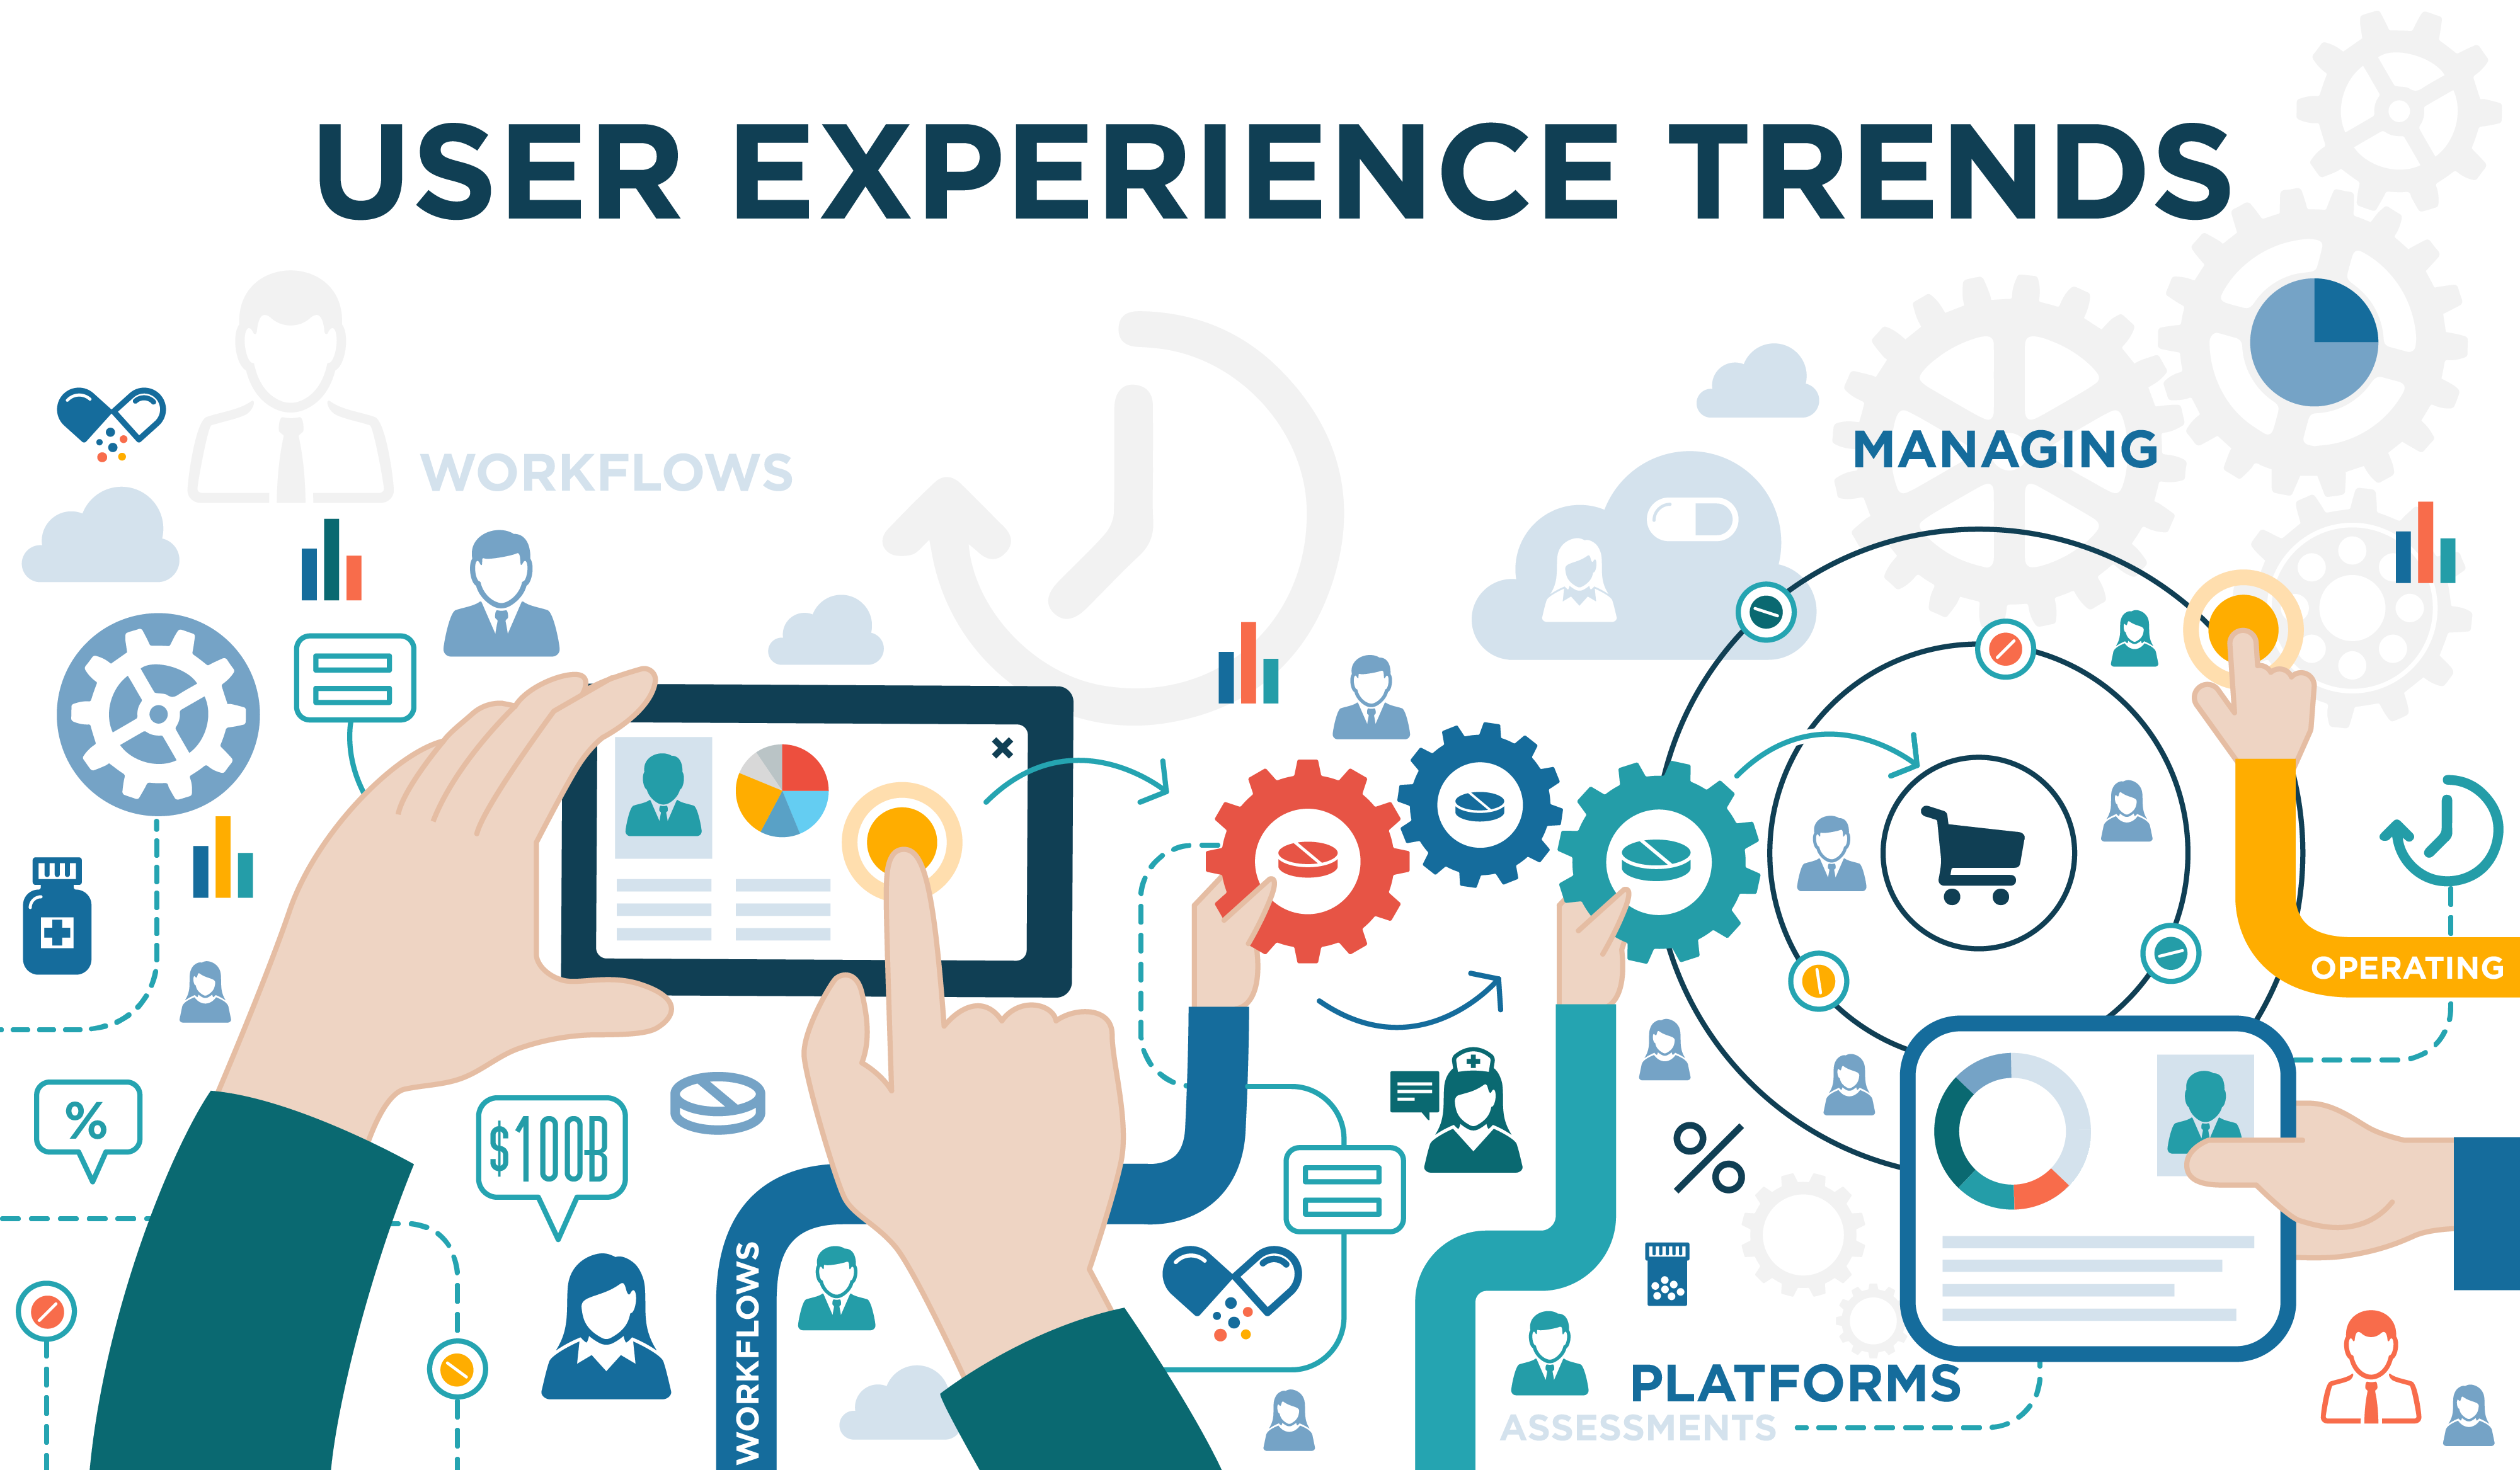 Clipart definition stakeholder. User experience trends in